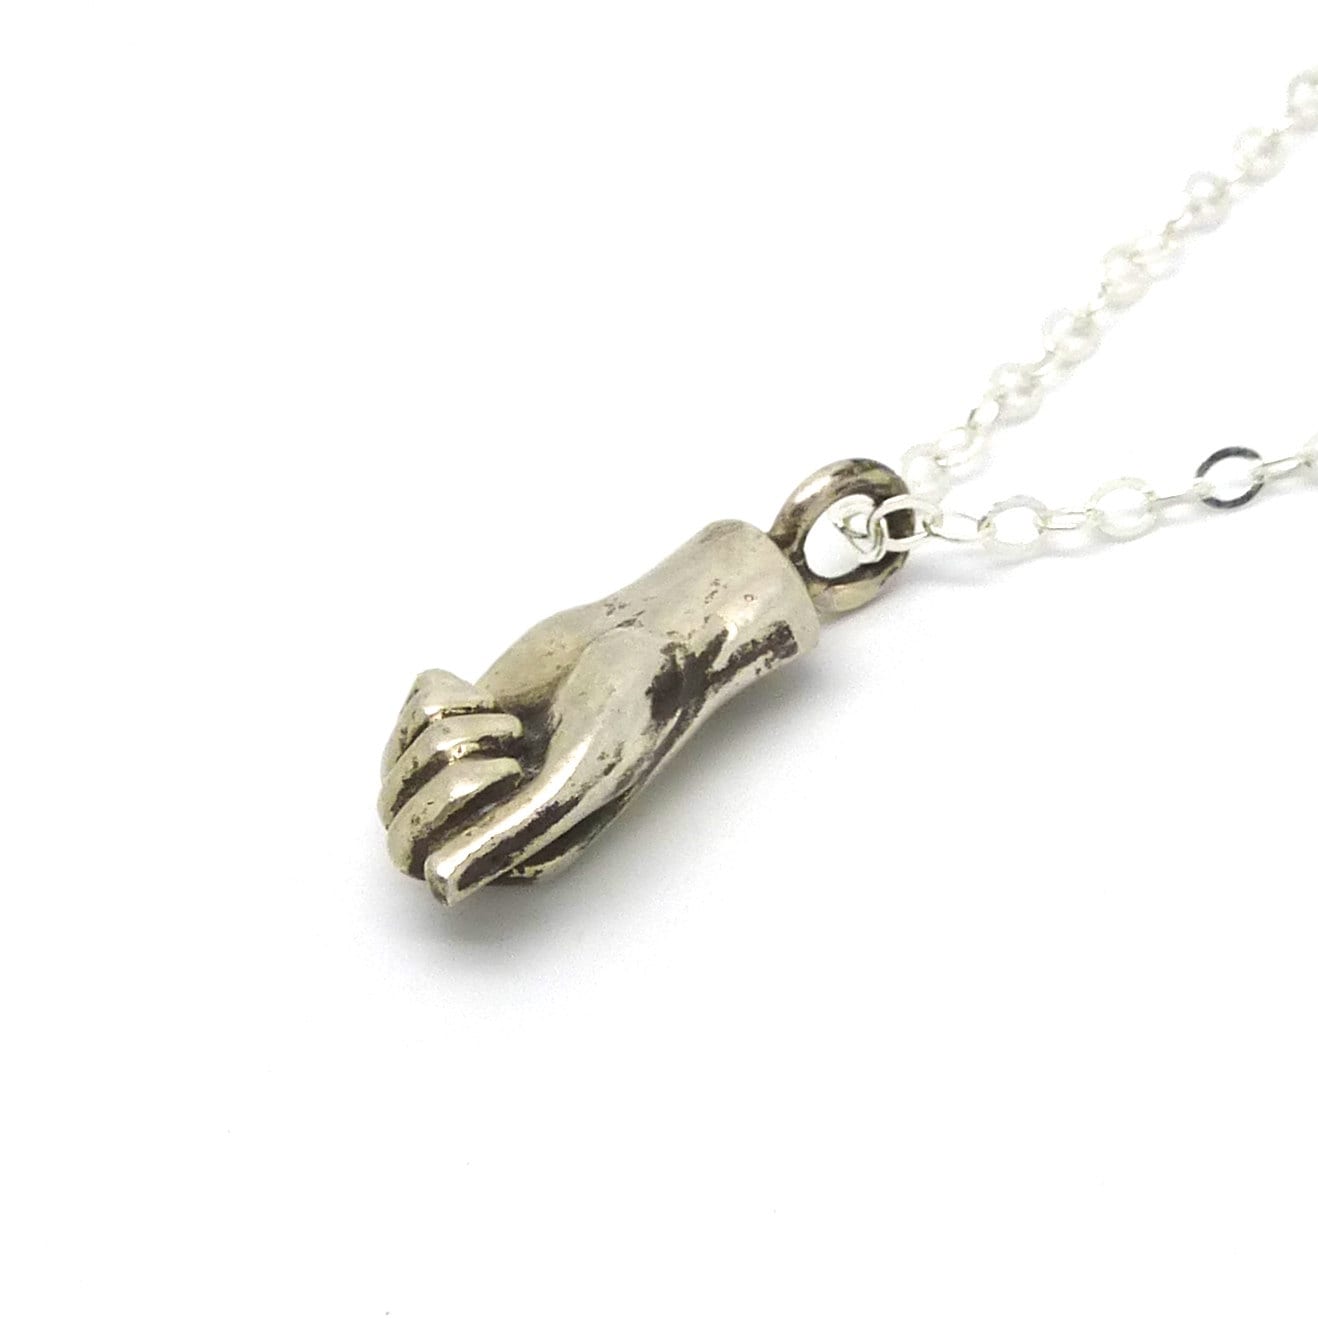 Tiny Silver Fist Necklace- Symbol of Strength and Unity